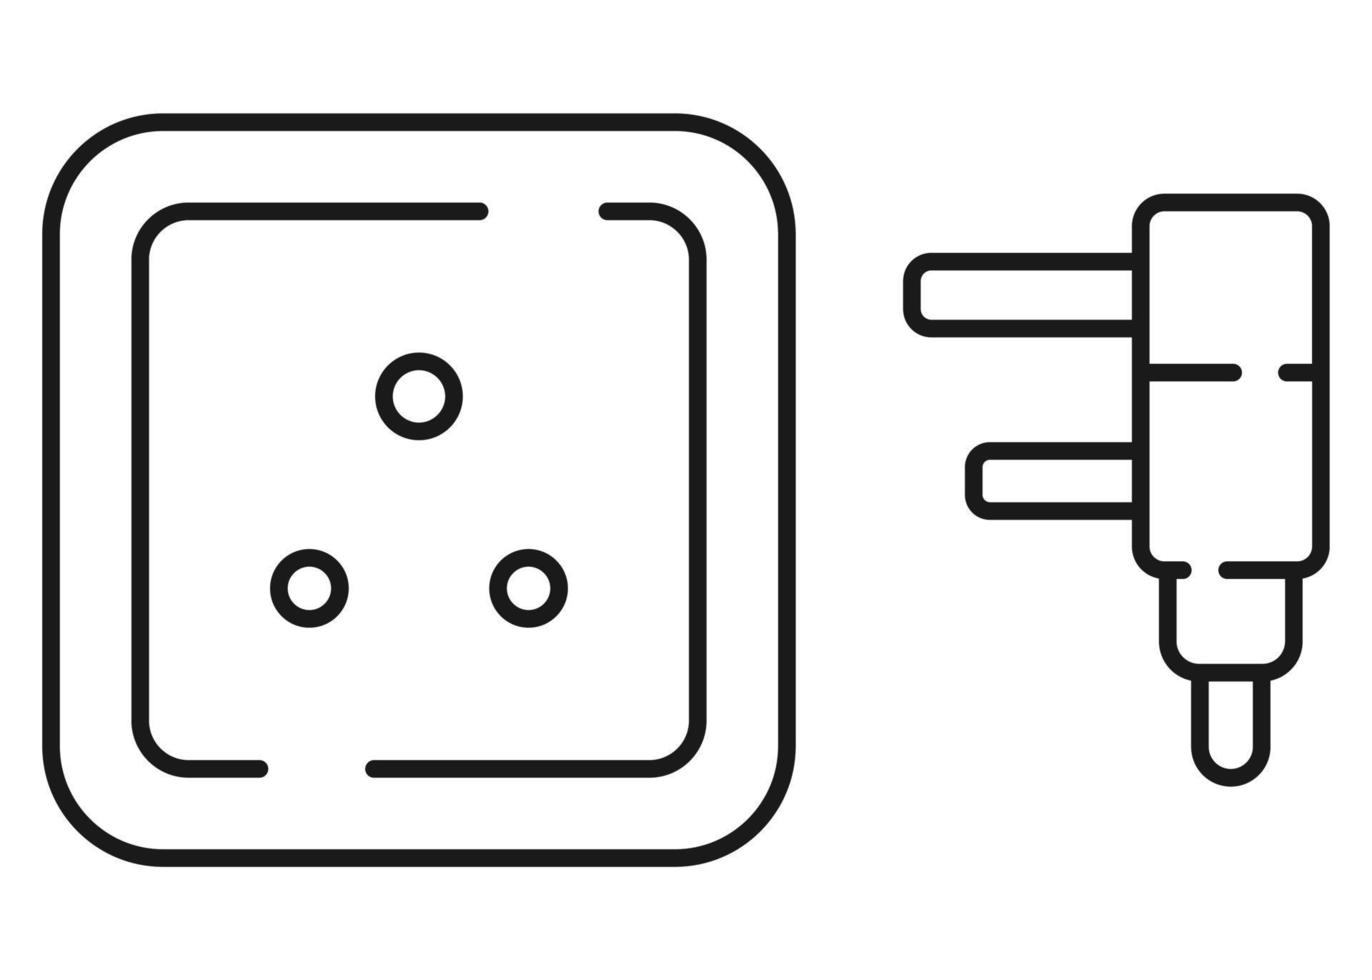 Power socket line icon. Vector illustration symbol in trendy flat style on white background.